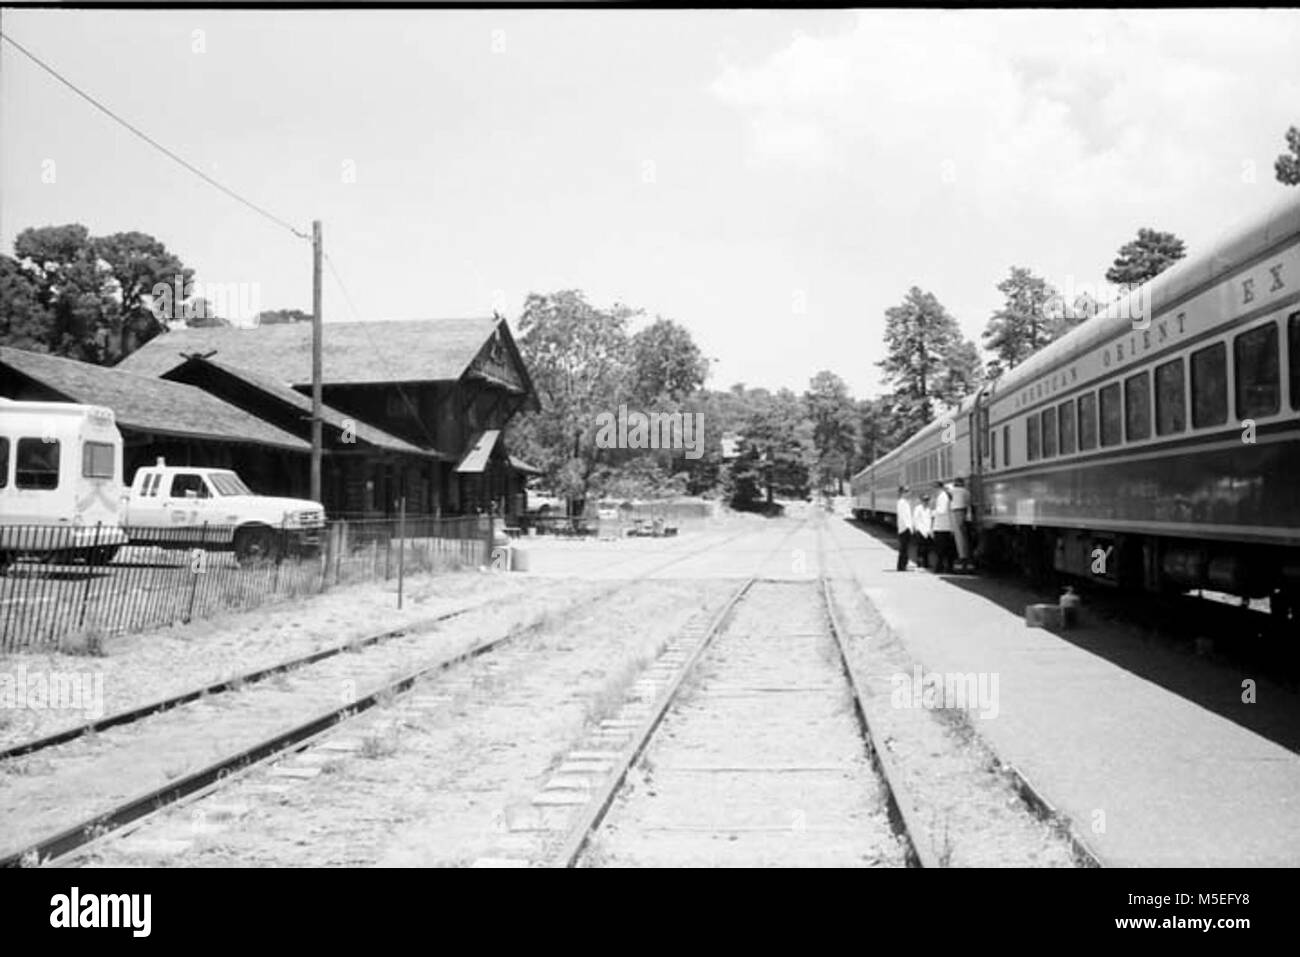 a Grand Canyon Historic Railroad Depot   LOOKING EAST AT AMERICAN ORIENT EXPRESS TRAIN IN GRCA YARD NEXT TO DEPOT.  JULY 20, 1995. Stock Photo